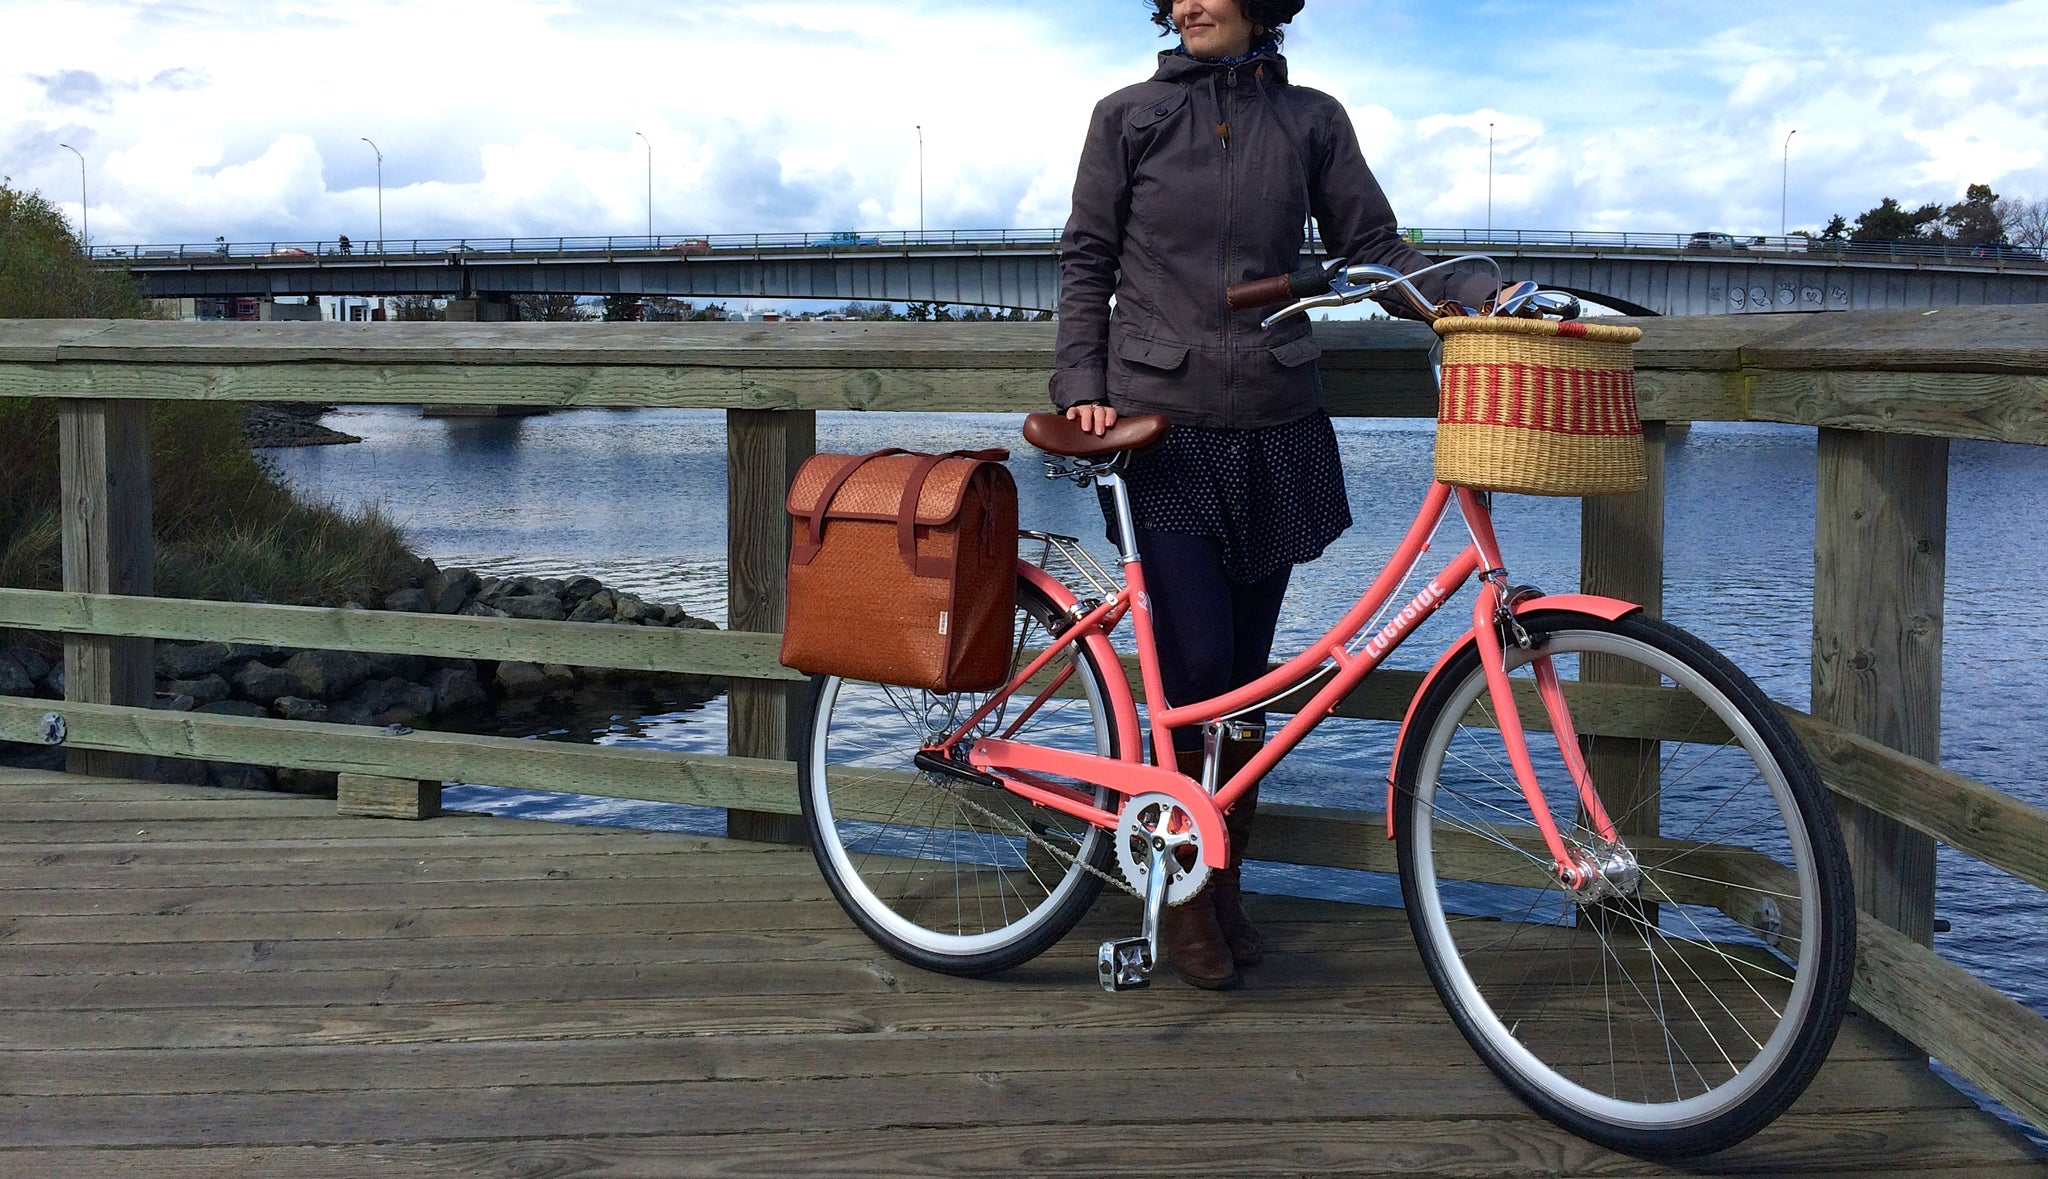 Le Vélo Victoria Bicycle Review of Lochside Cycles Ariel with Bobbin Pannier and House of Talents Bicycle basket available at Le Vélo Victoria